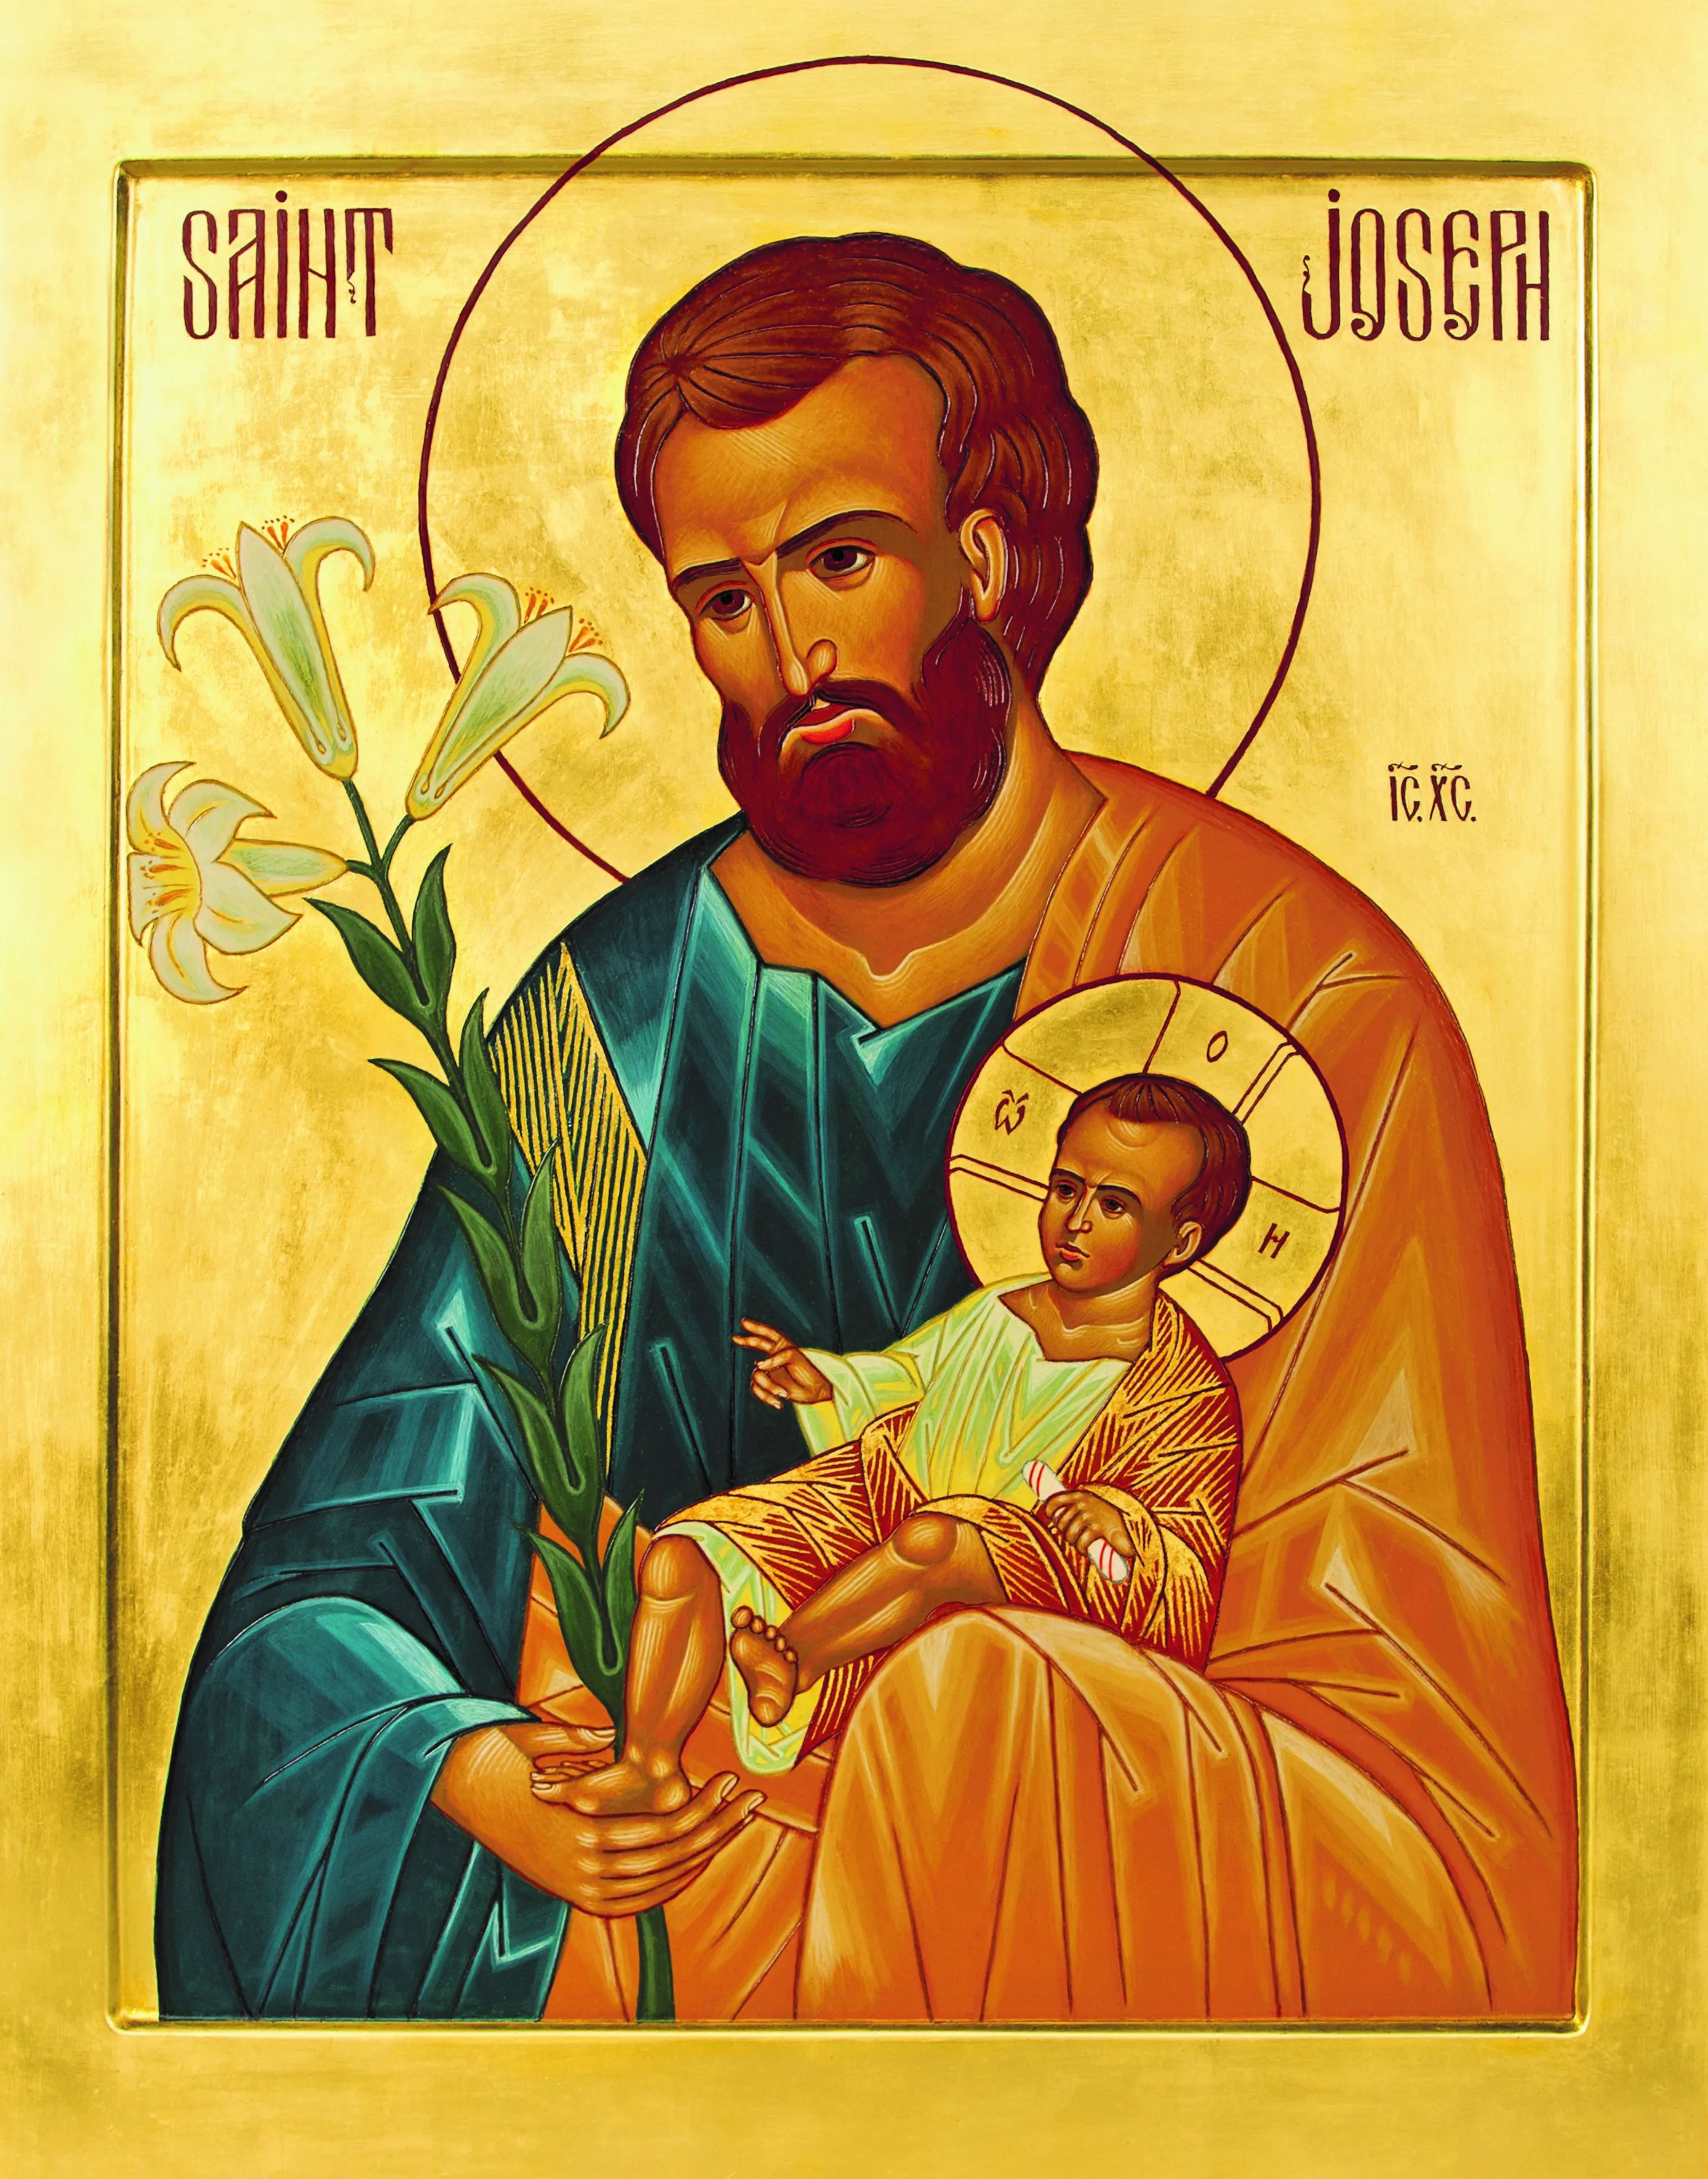 The Knights of Columbus's pilgrim icon prayer program is a longstanding tradition, in which every few years a new icon of a saint is selected to inspire the Knights and their communities. This year, the Knights have chosen an icon of St. Joseph holding the child Jesus from St. Joseph’s Oratory in Montreal, Canada. Jeffrey Bruno, Courtesy of the Knights of Columbus.